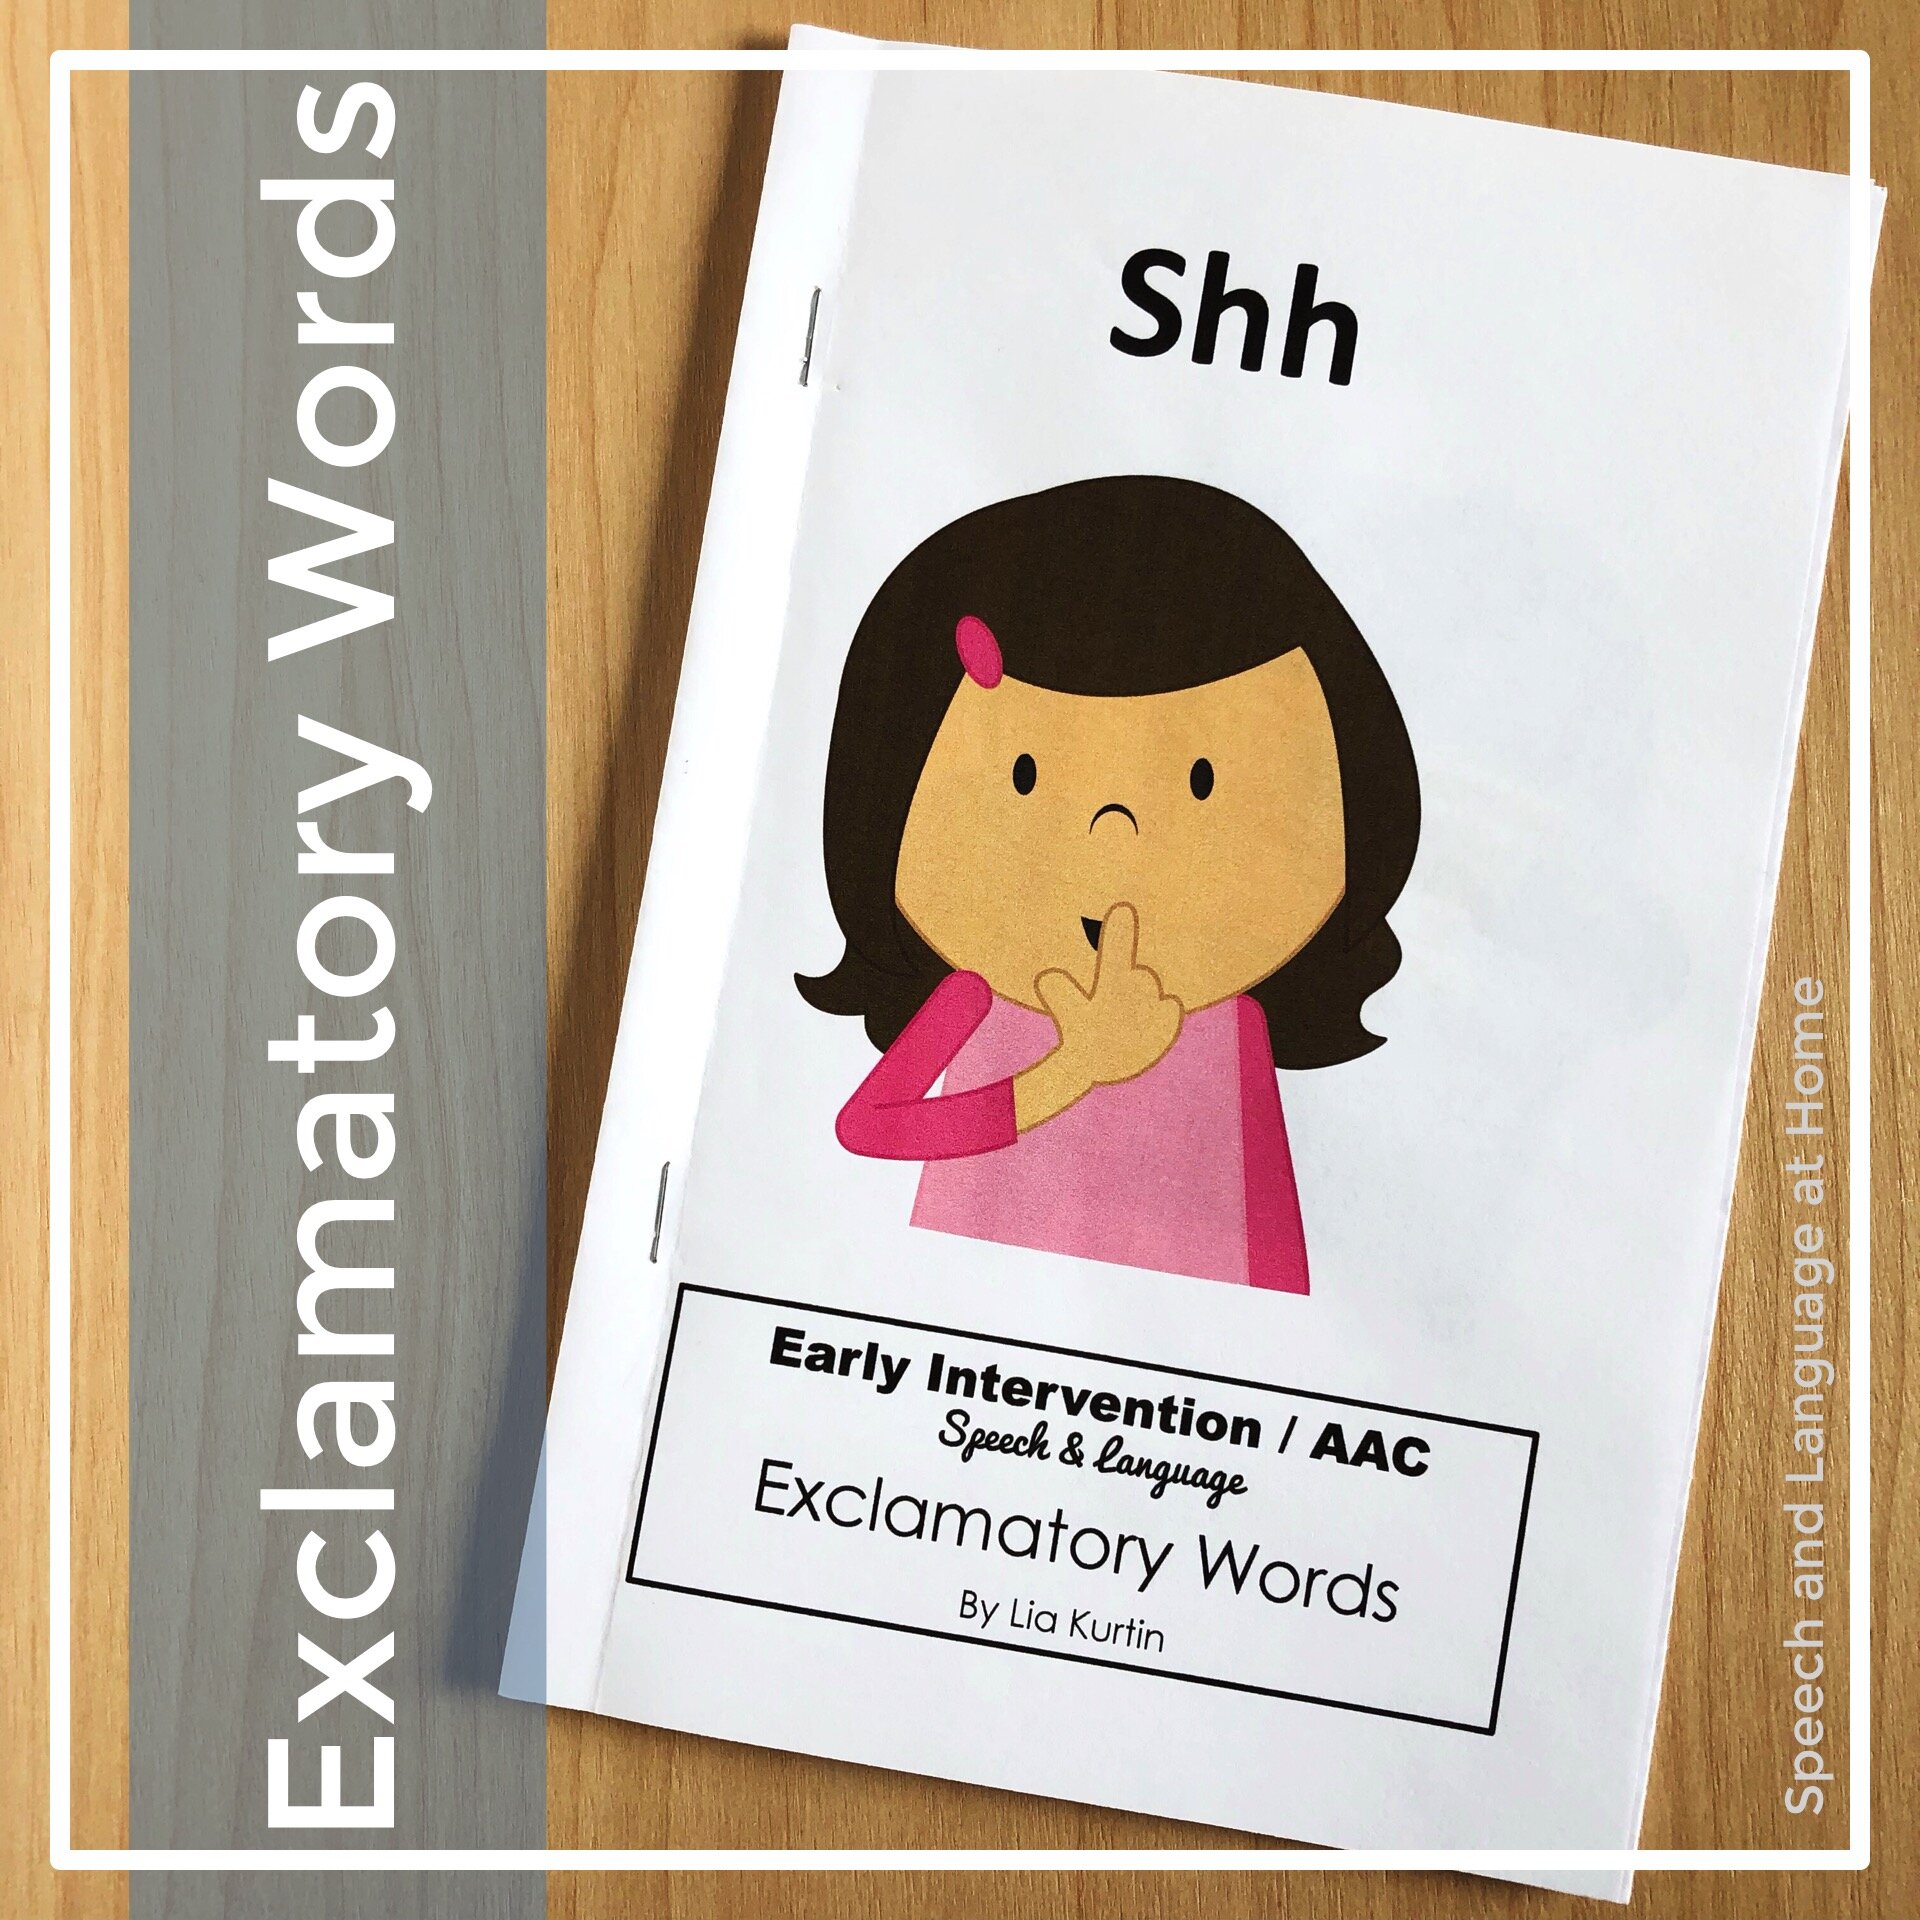 Shh Exclamatory Words Speech Therapy Book